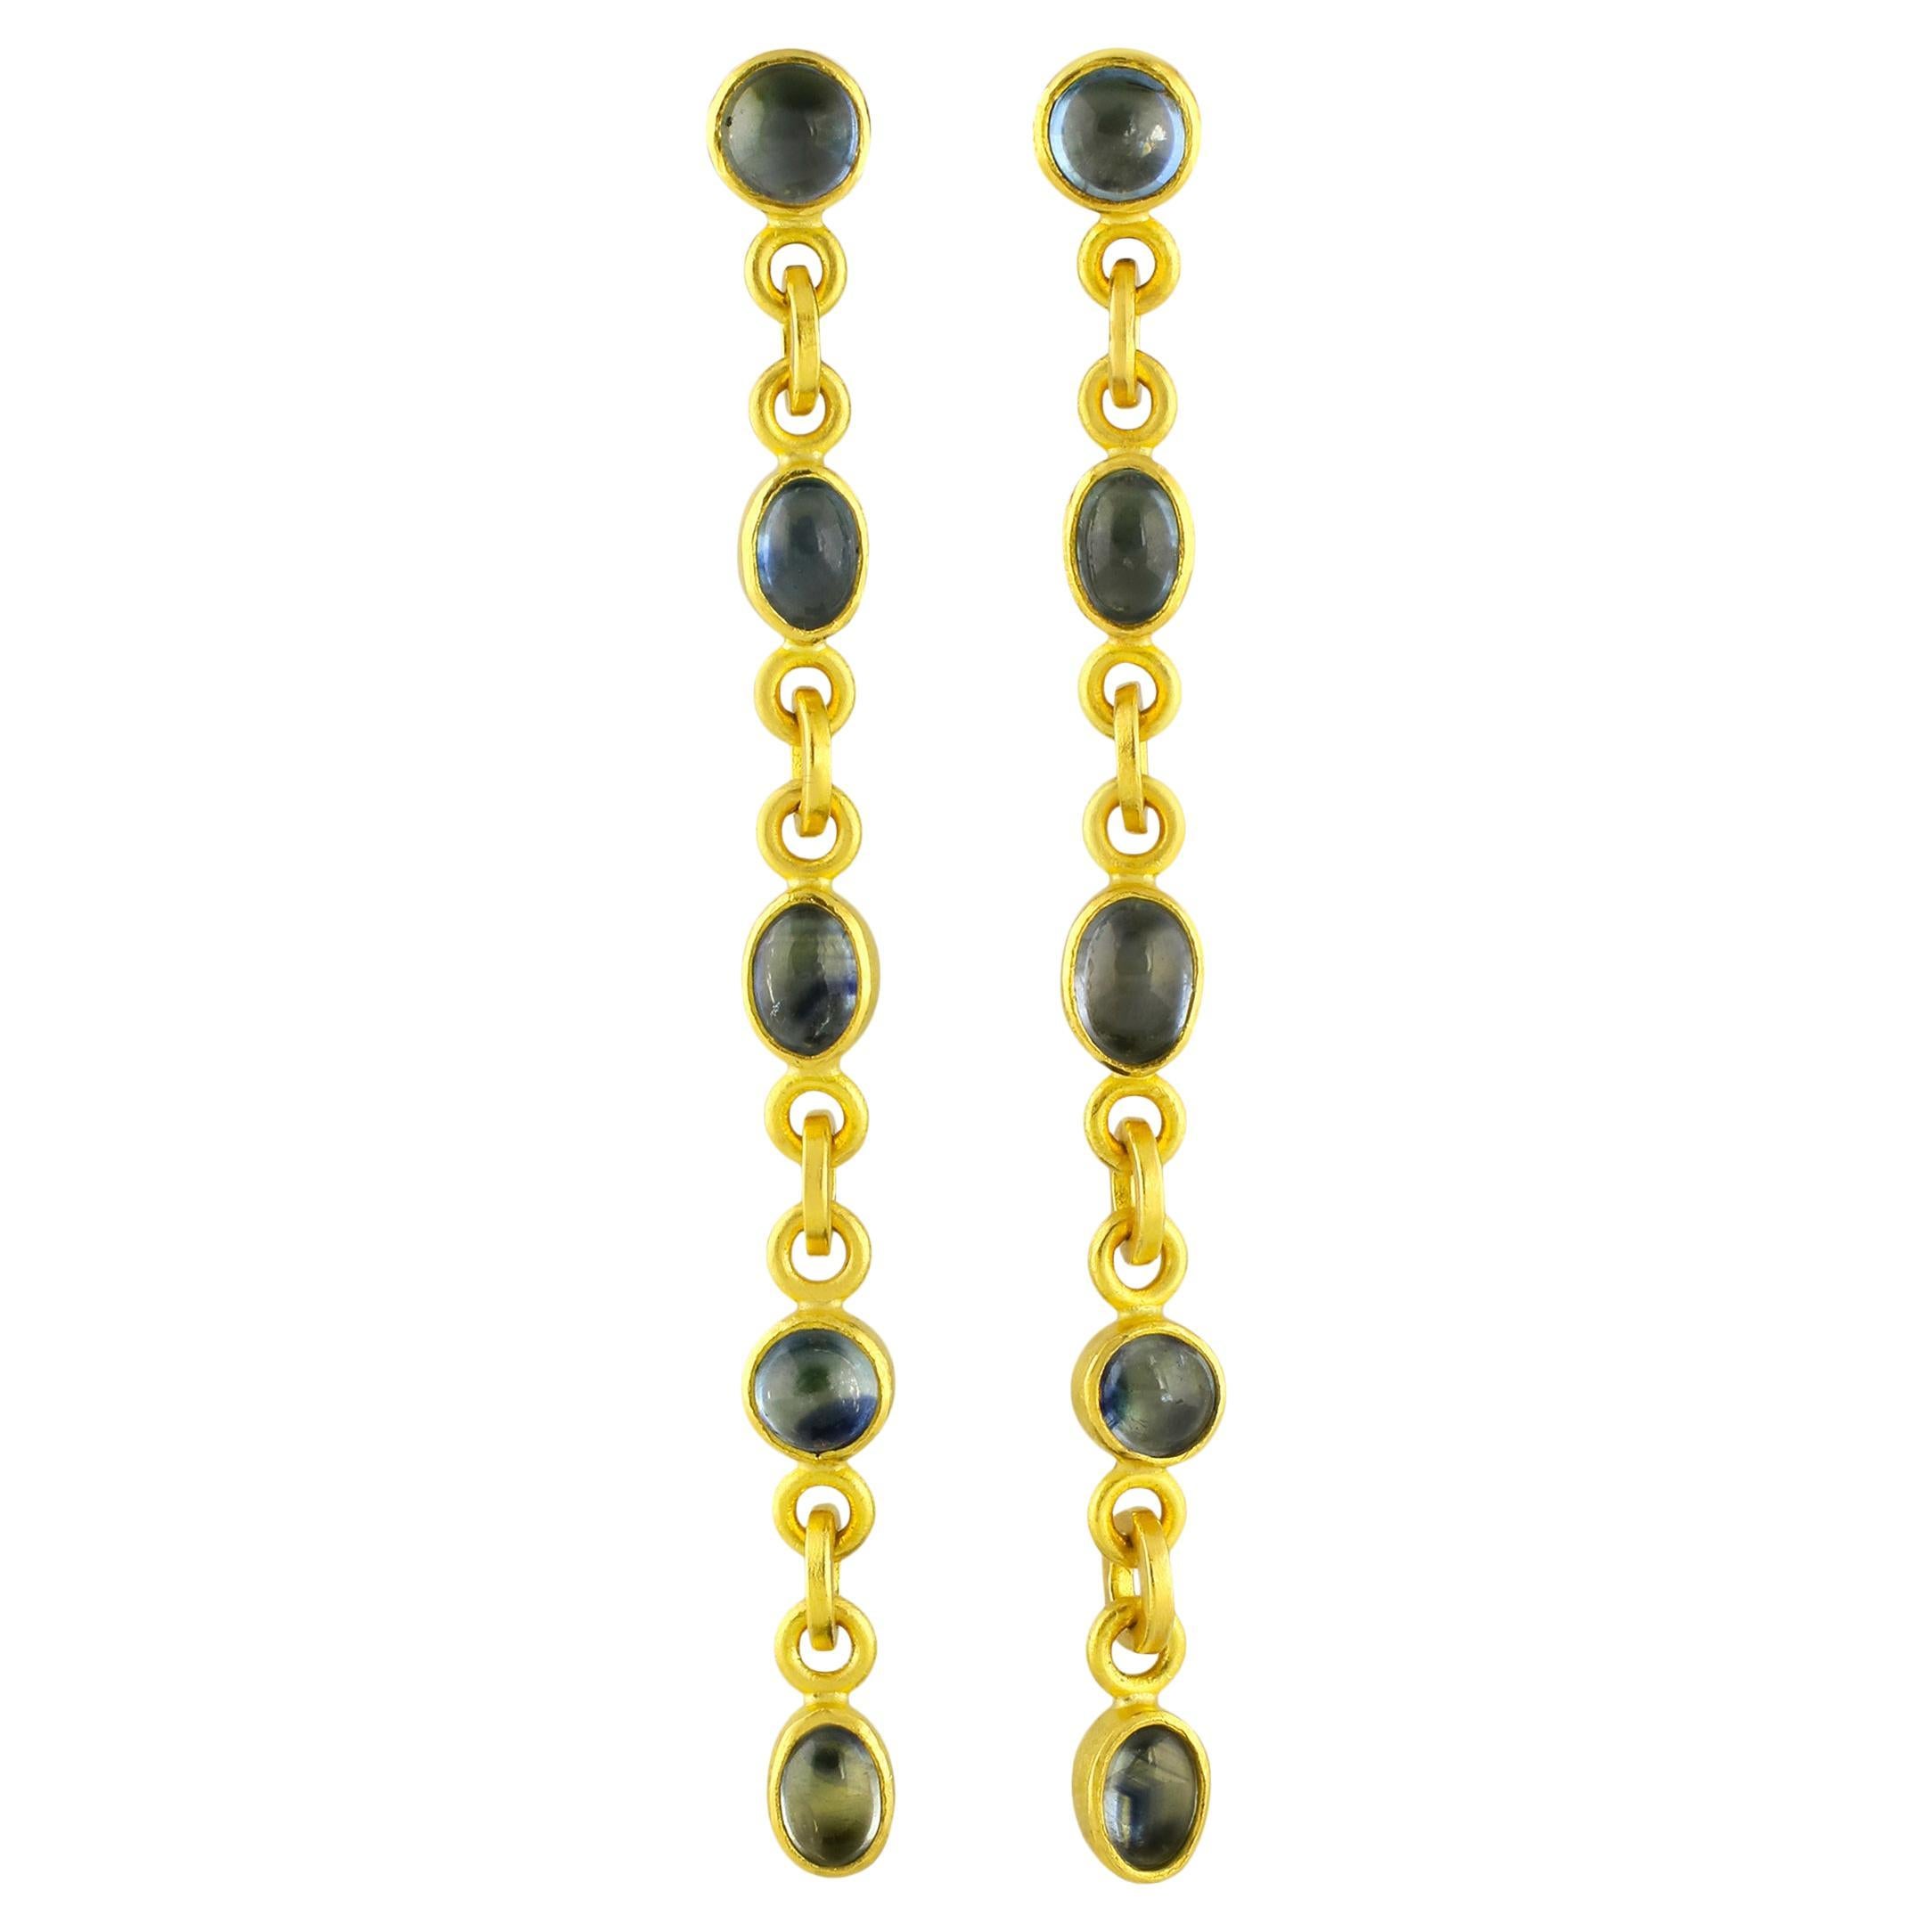 PHILIPPE SPENCER 22K & 20K Gold with 7.97 Ct. Sapphire Statement Earrings For Sale